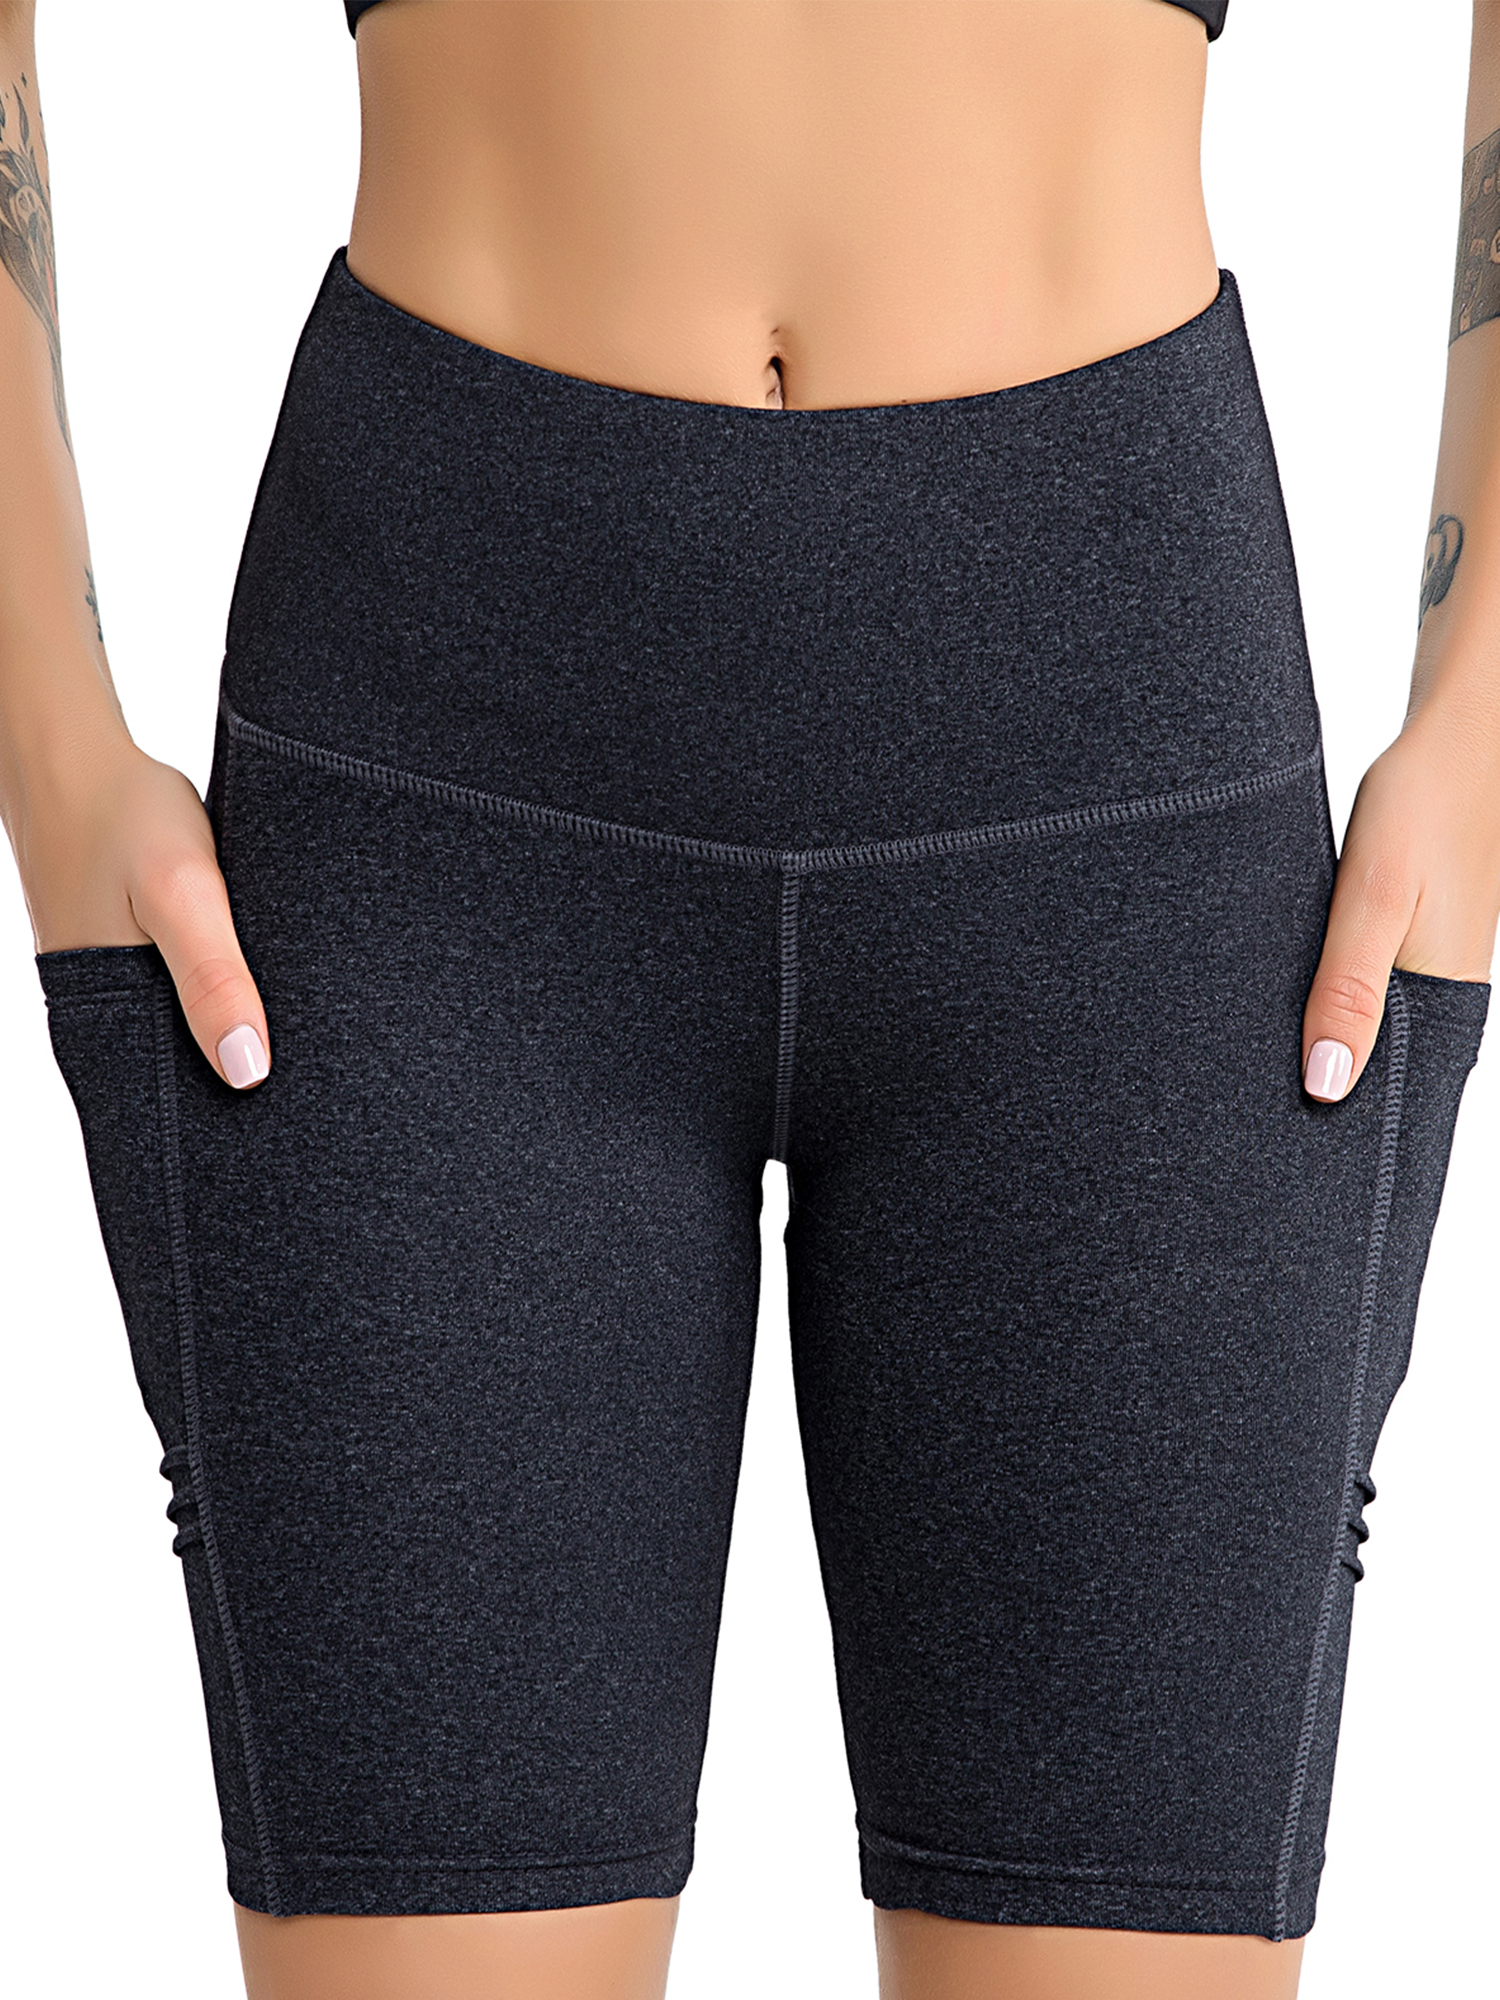 Tummy Control Yoga Shorts with Pockets for Women Workout Running Athletic Bike High Waist Activewear Bottoms - image 8 of 8